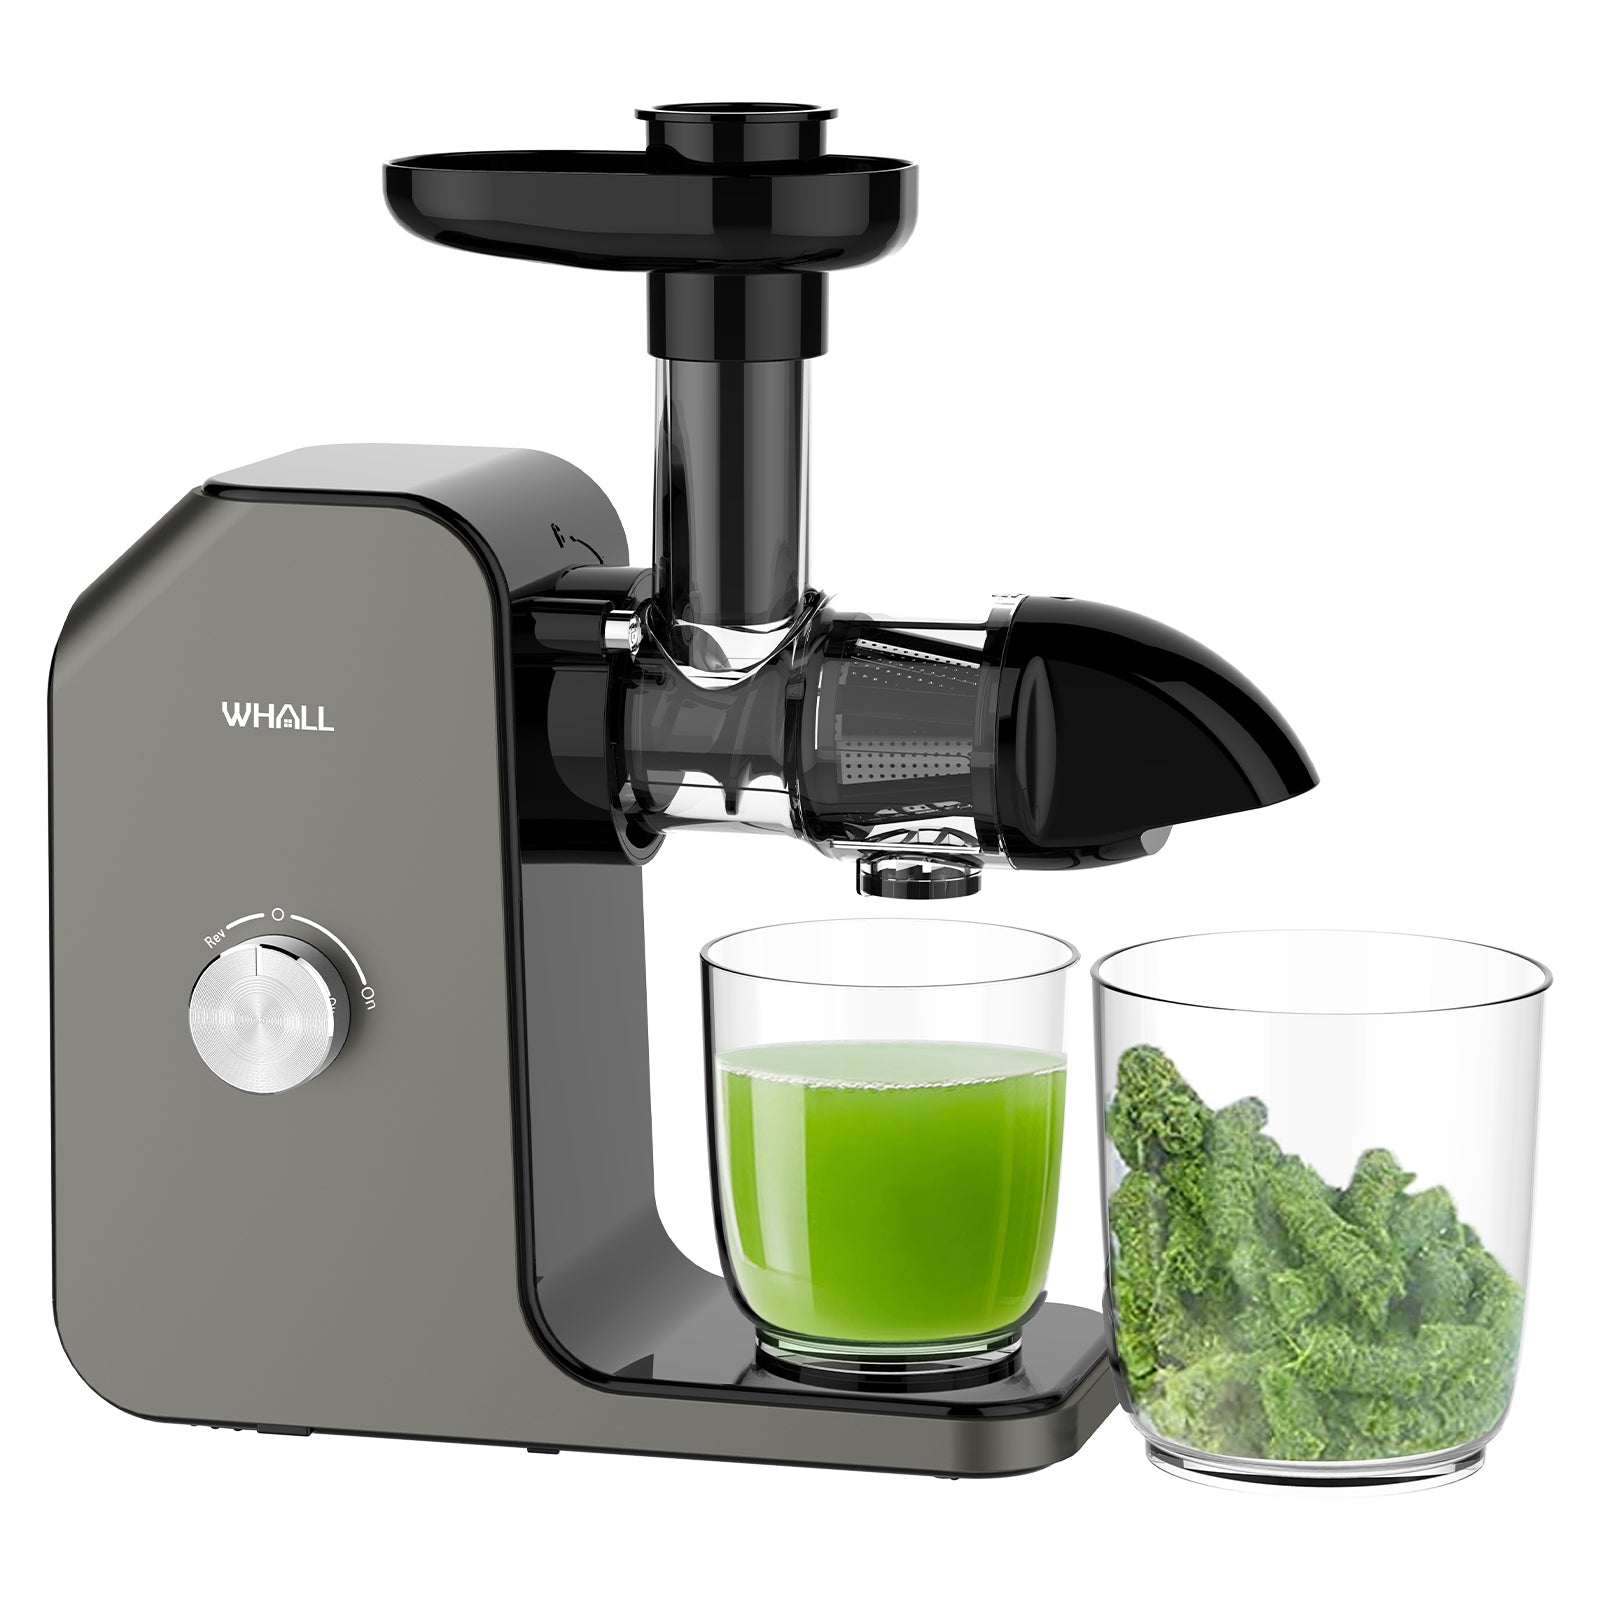 whall® Slow Juicer ZM1512, Masticating Juicer, Celery Juicer Machines, Cold Press Juicer Machines Vegetable and Fruit, Juicers with Quiet Motor & Reverse Function, Easy to Clean with Brush,Grey